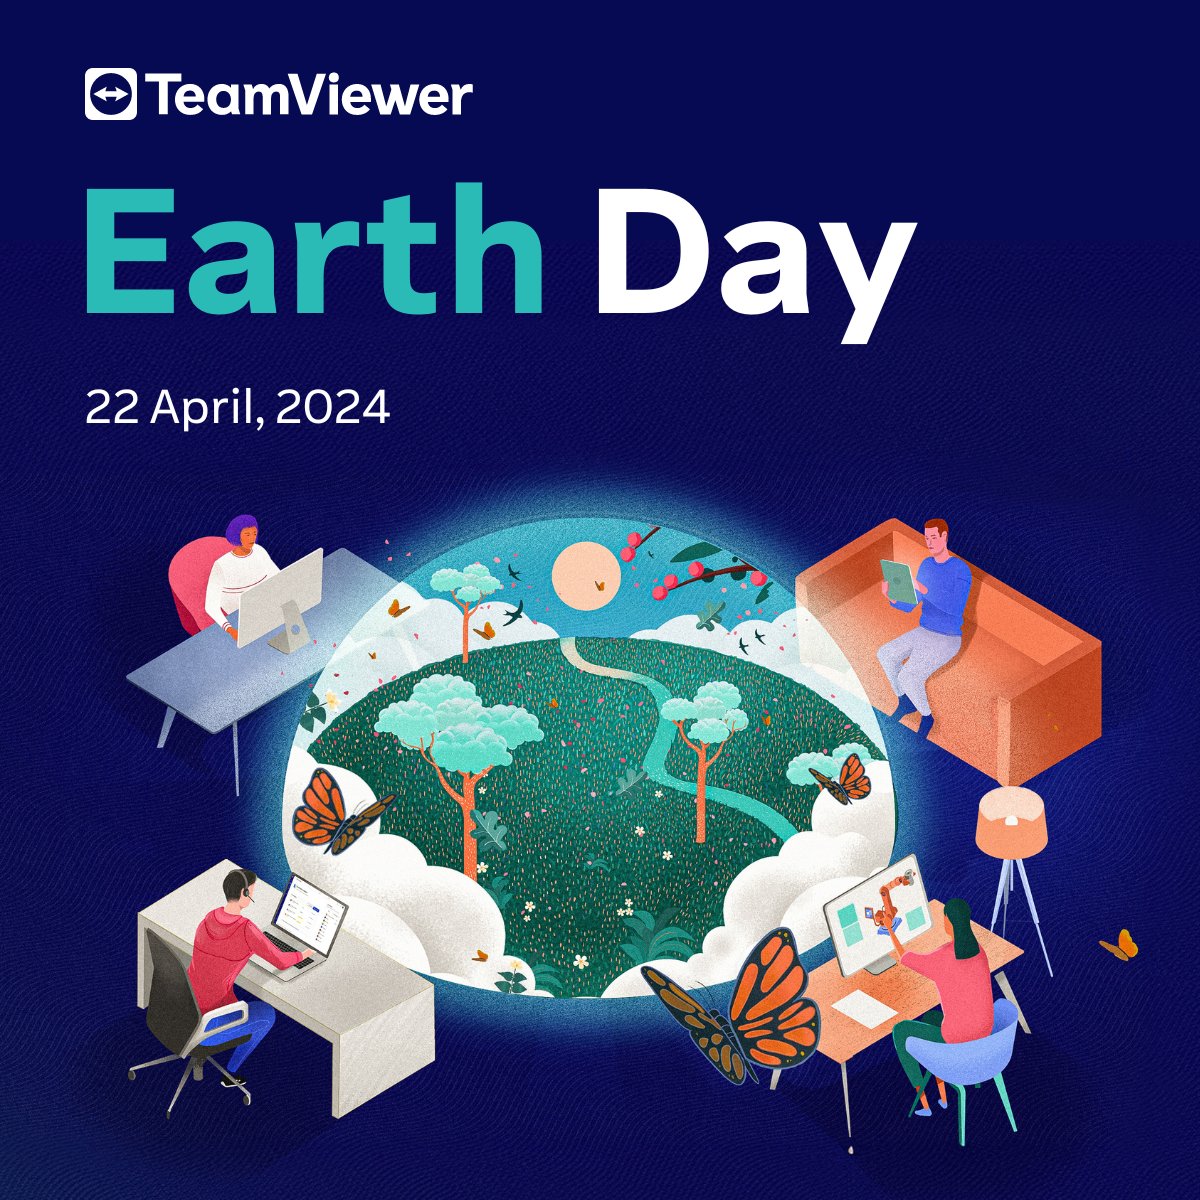 Let's celebrate some of #TeamViewer's sustainability milestones this #EarthDay 🎉Reduced our carbon footprint by 15% in 2023. Enabled 41 million tons of CO2 emission avoidance with our solutions in 2022. Empowered our workforce to make an impact. ➡️ bit.ly/3STNtjx.